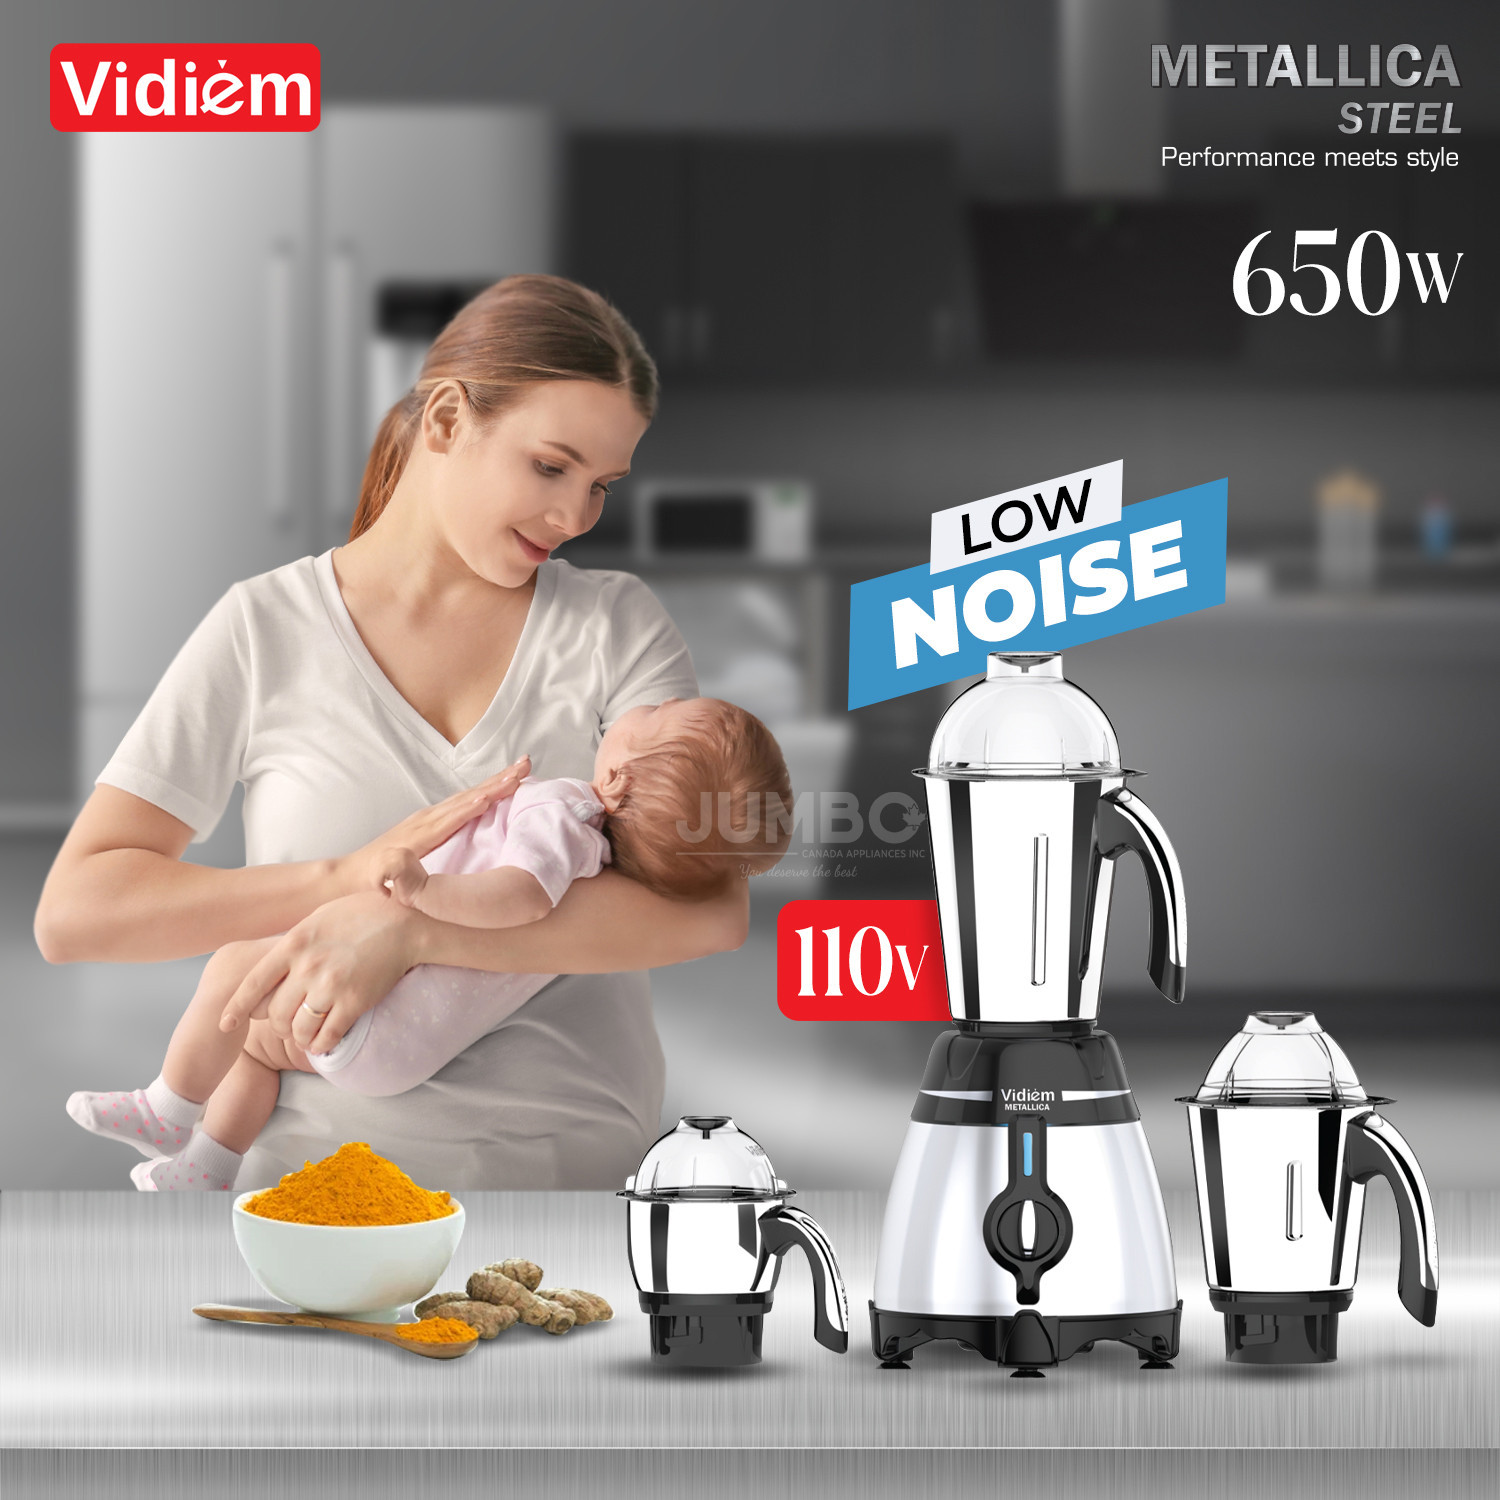 vidiem-metallica-steele-650w-110v-stainless-steel-jars-indian-mixer-grinder-with-spice-coffee-grinder-jar-for-use-in-canada-usa4